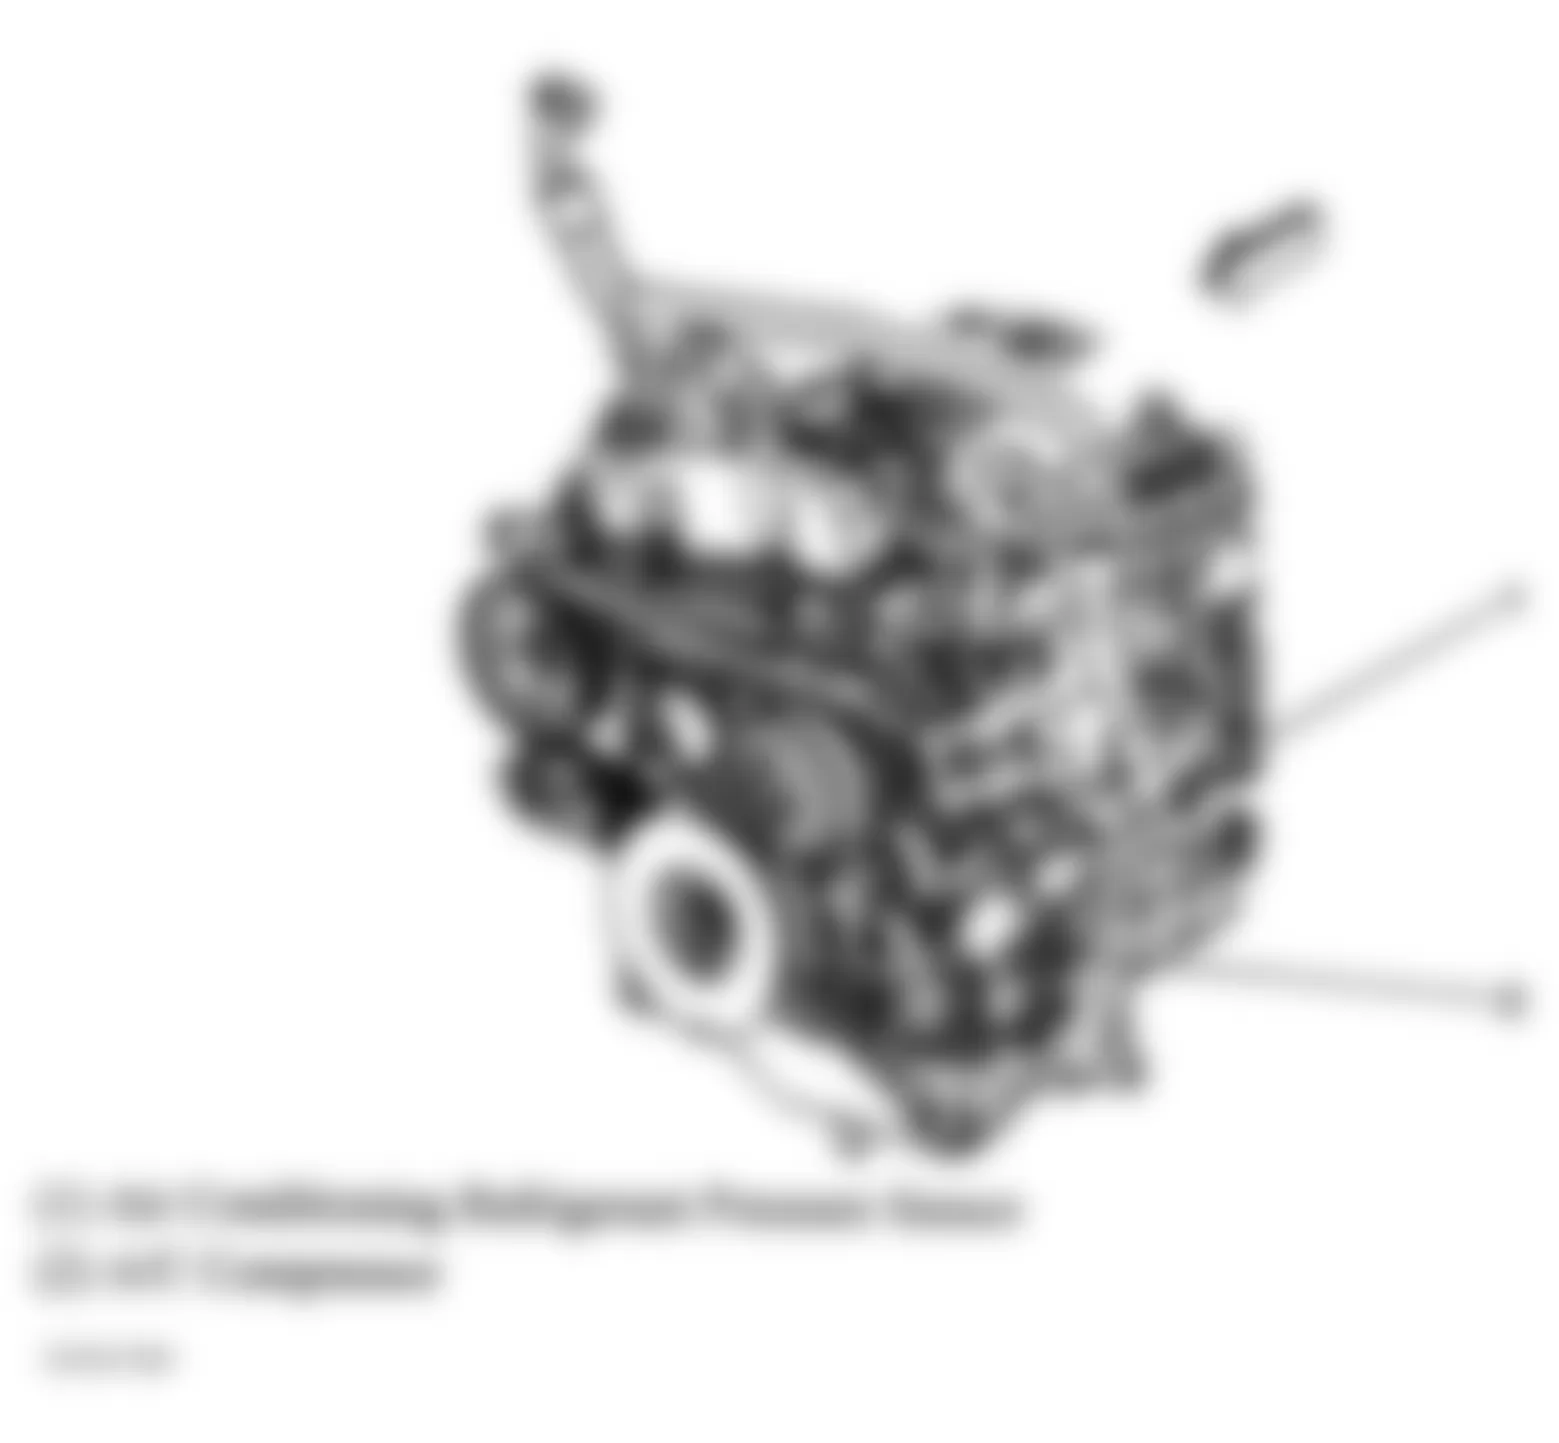 GMC Envoy XUV 2004 - Component Locations -  Front Of Engine (4.2L)